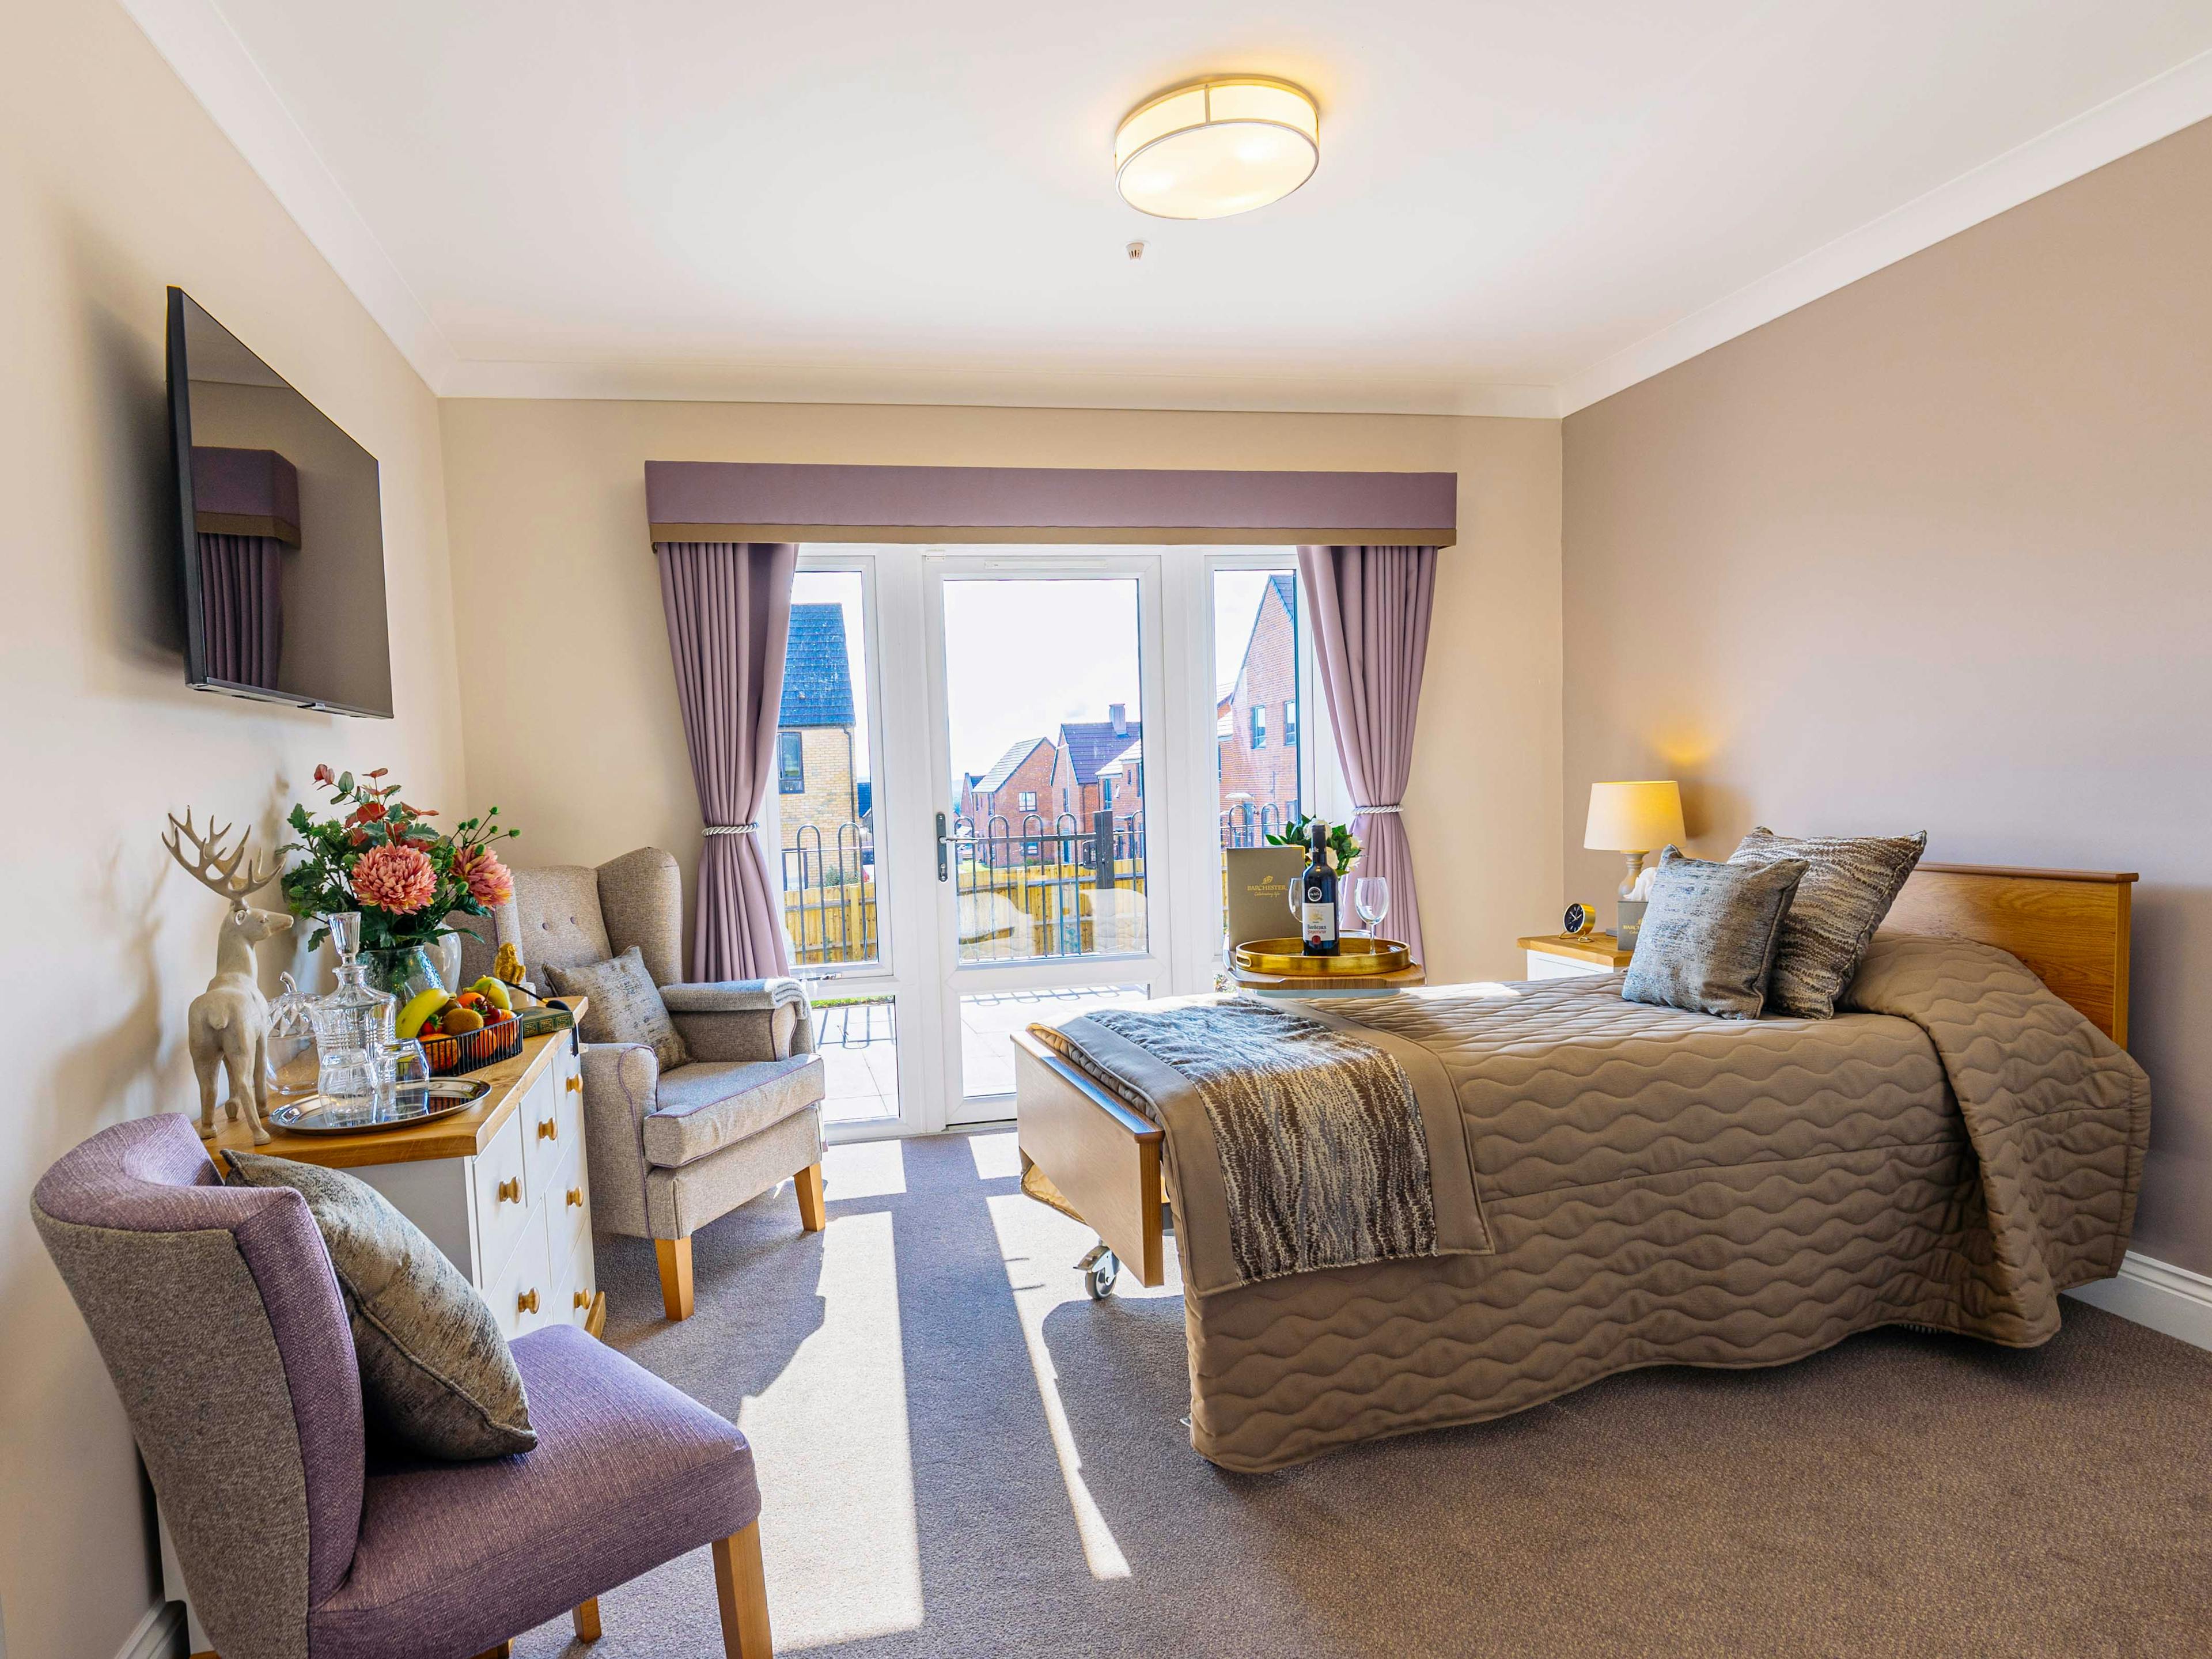 Bedroom at Elgar Court Care Home in Malvern, Worcestershire